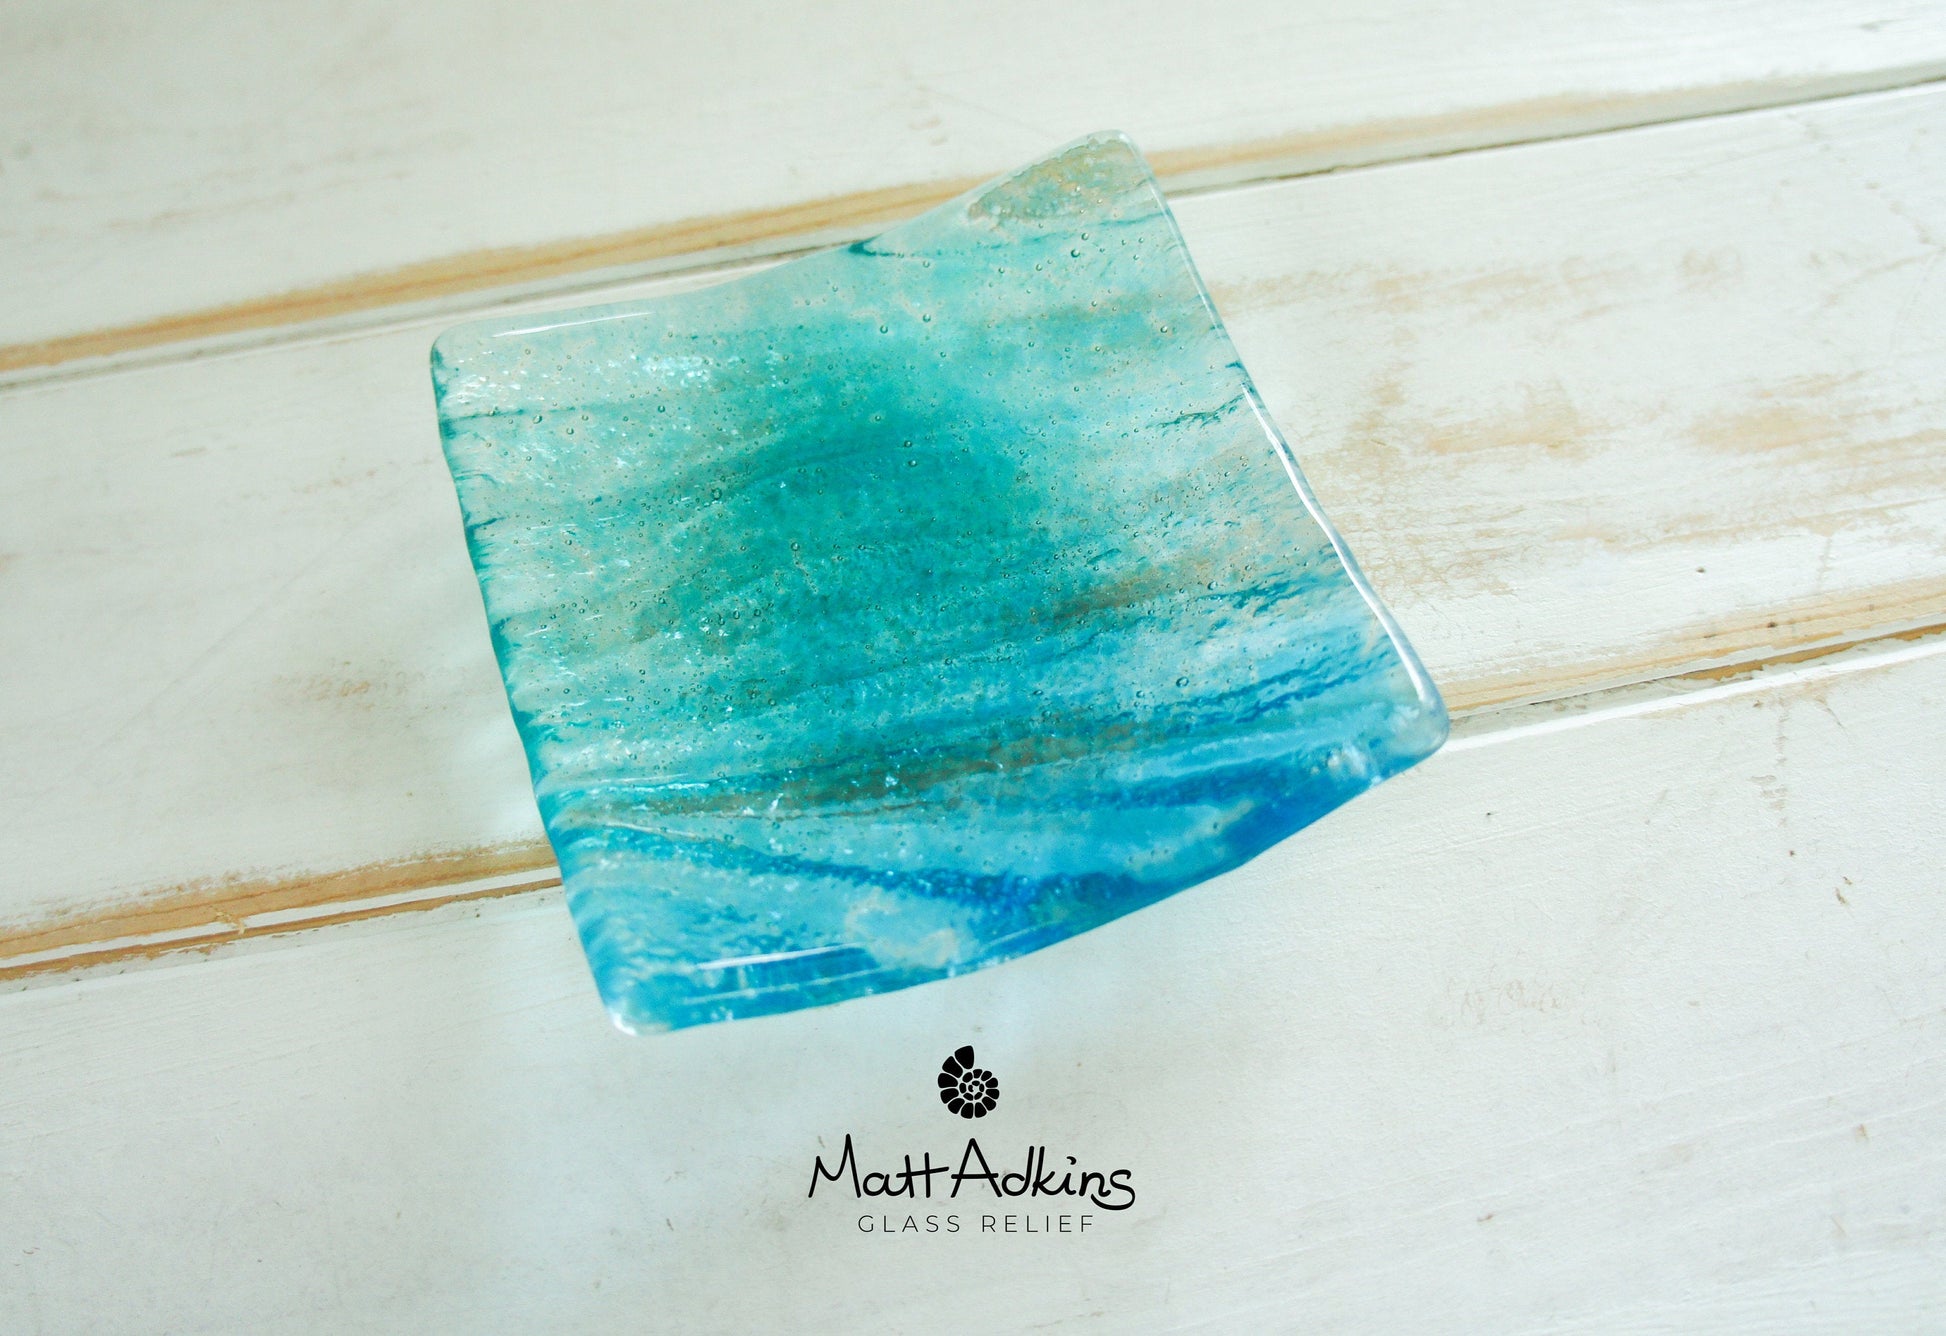 Seabed Teal Ring Glass Dish